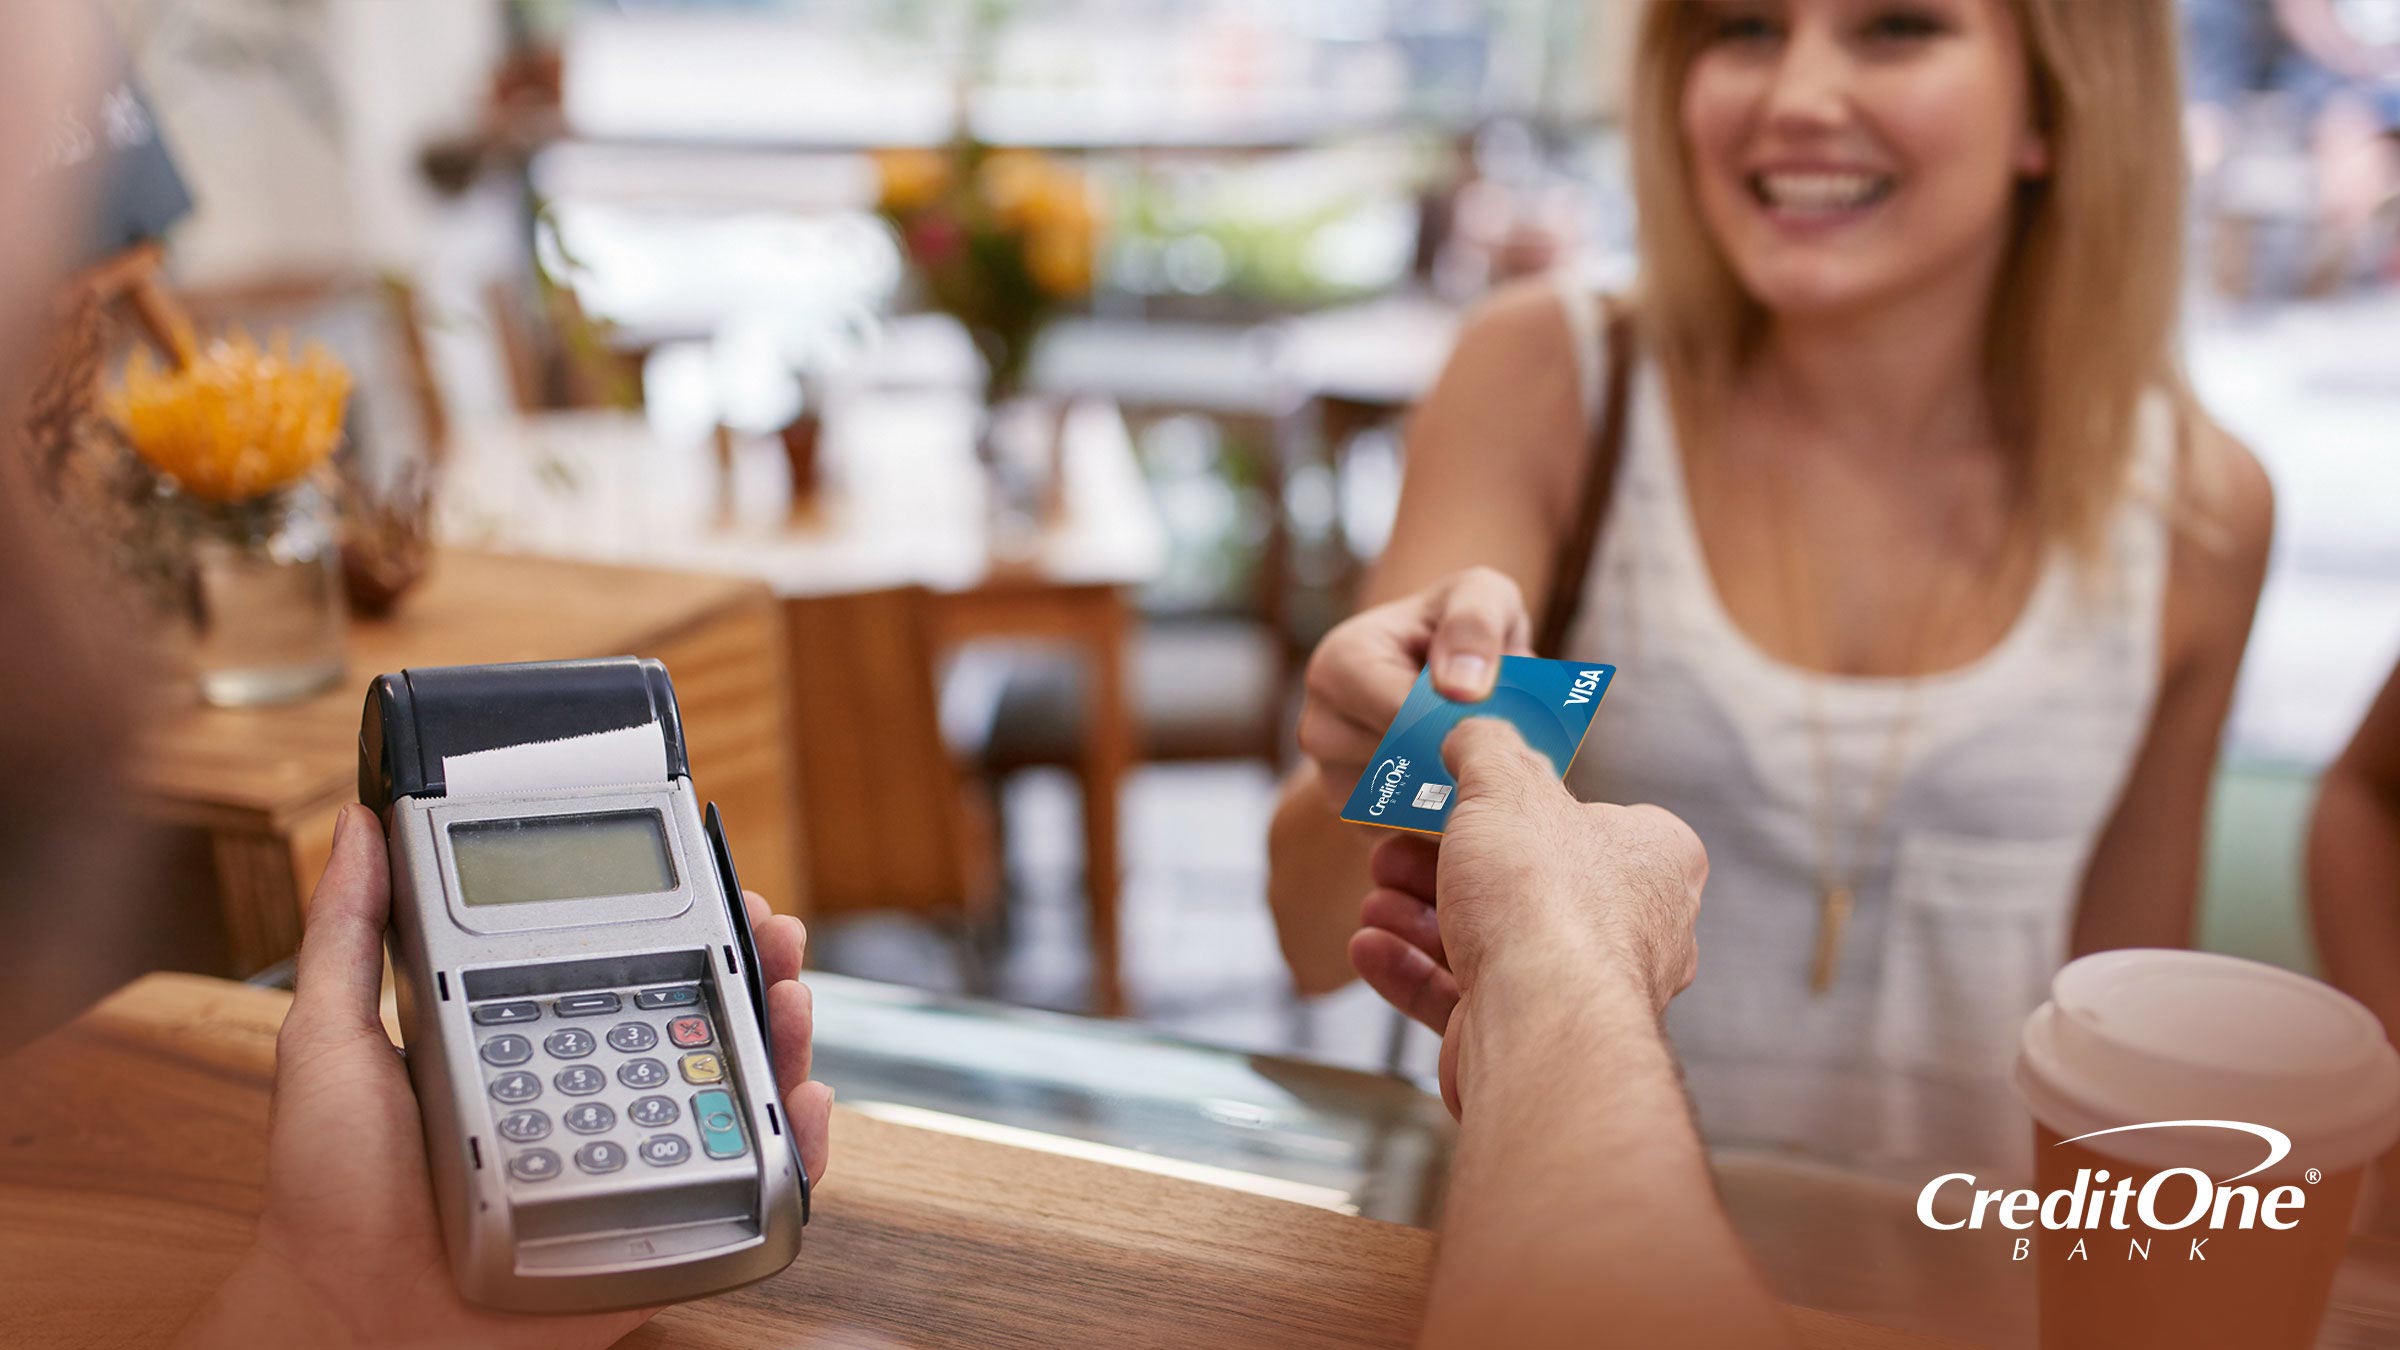 Purchasing a coffee using a Credit One Bank credit card